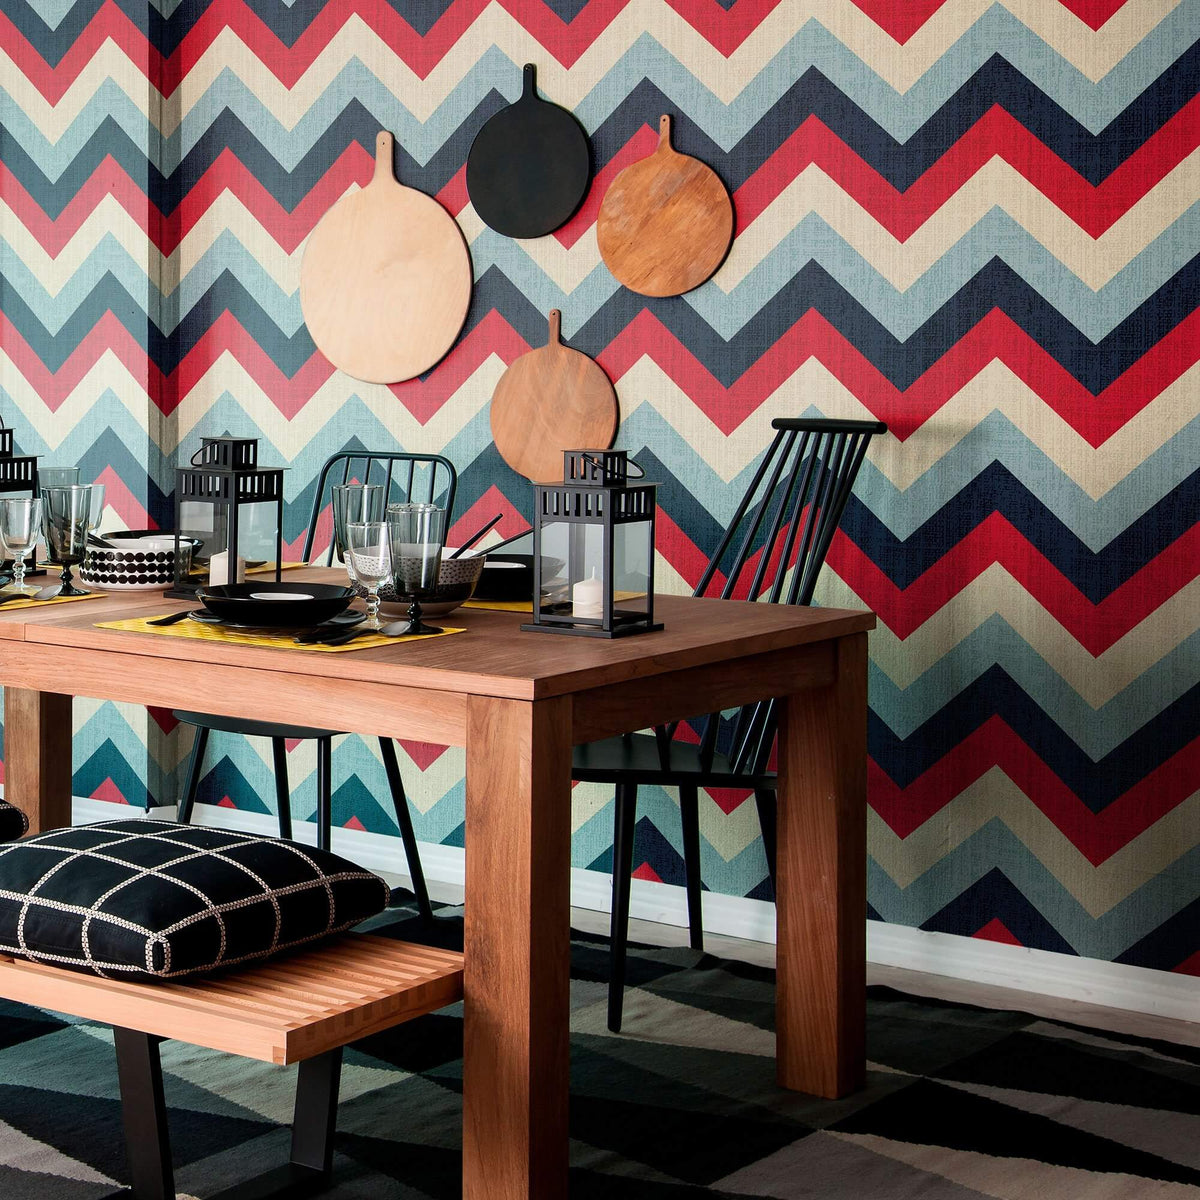 red and green chevron wallpaper